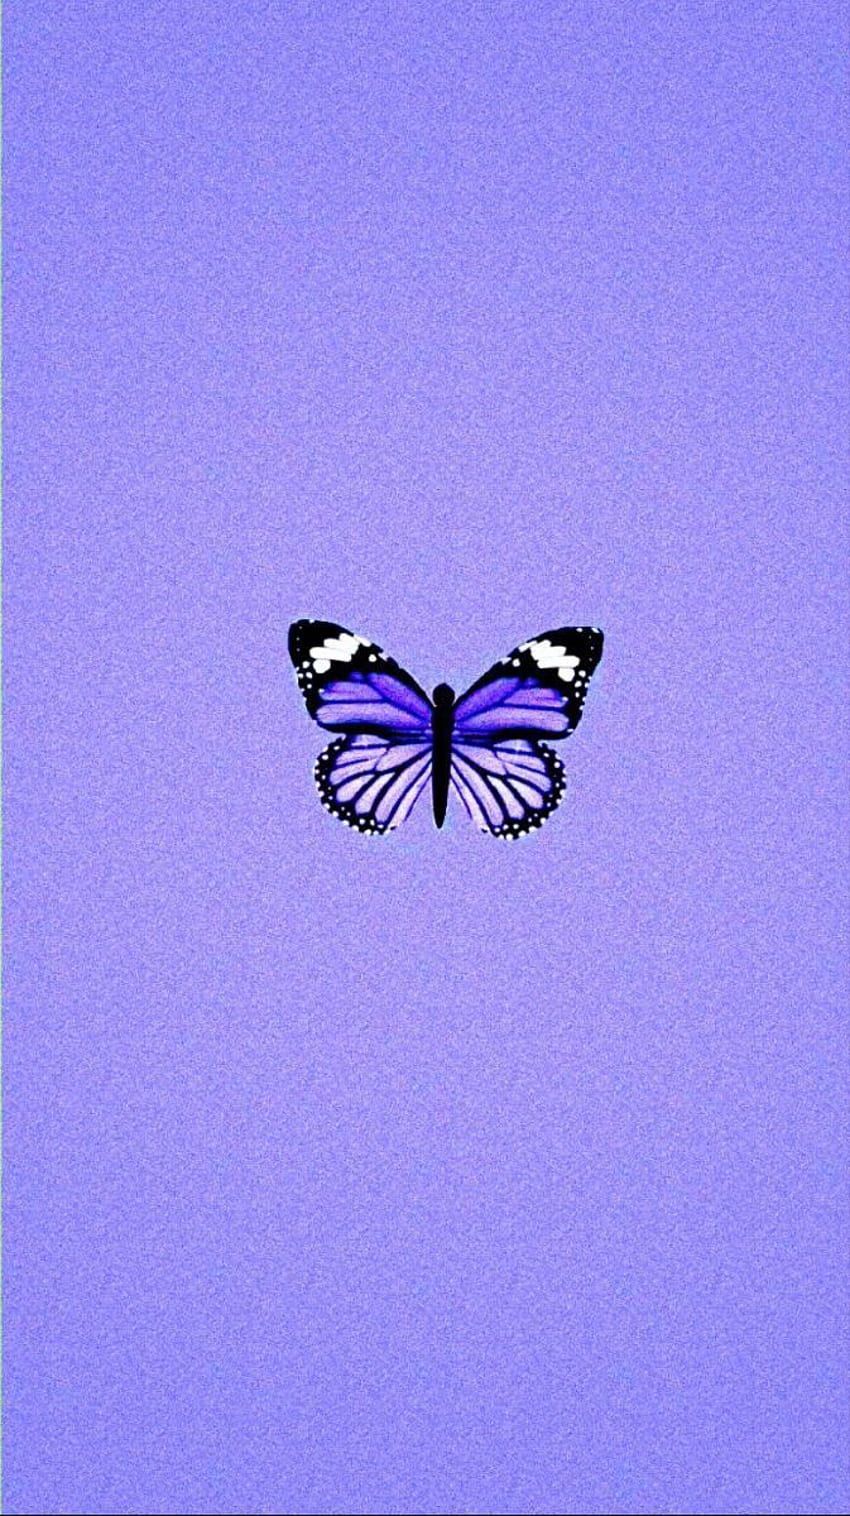 A butterfly is on the screen - Violet, cute purple